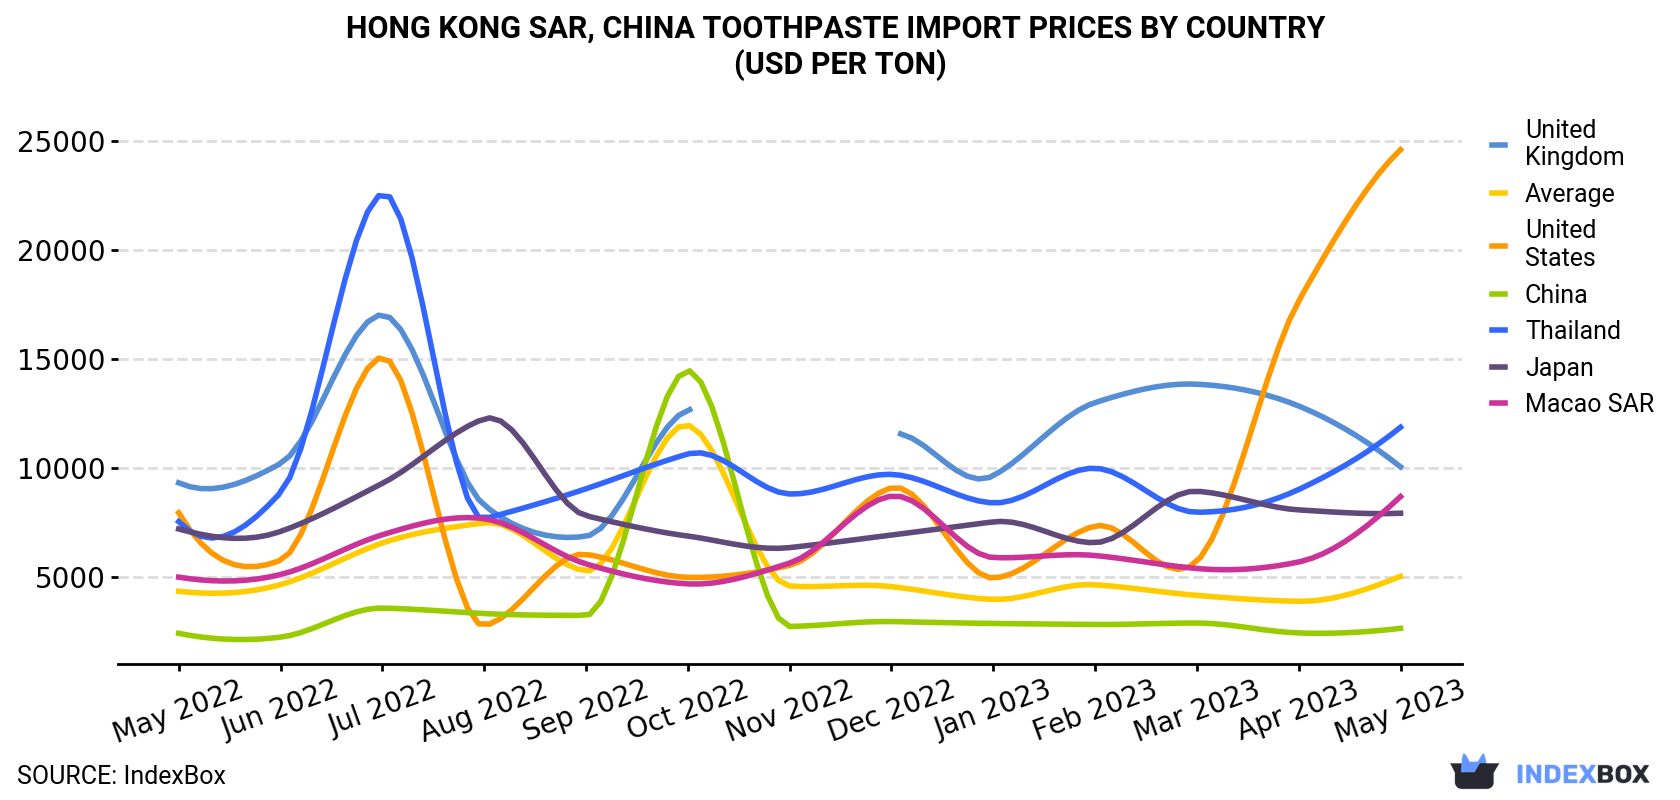 Hong Kong Toothpaste Import Prices By Country (USD Per Ton)